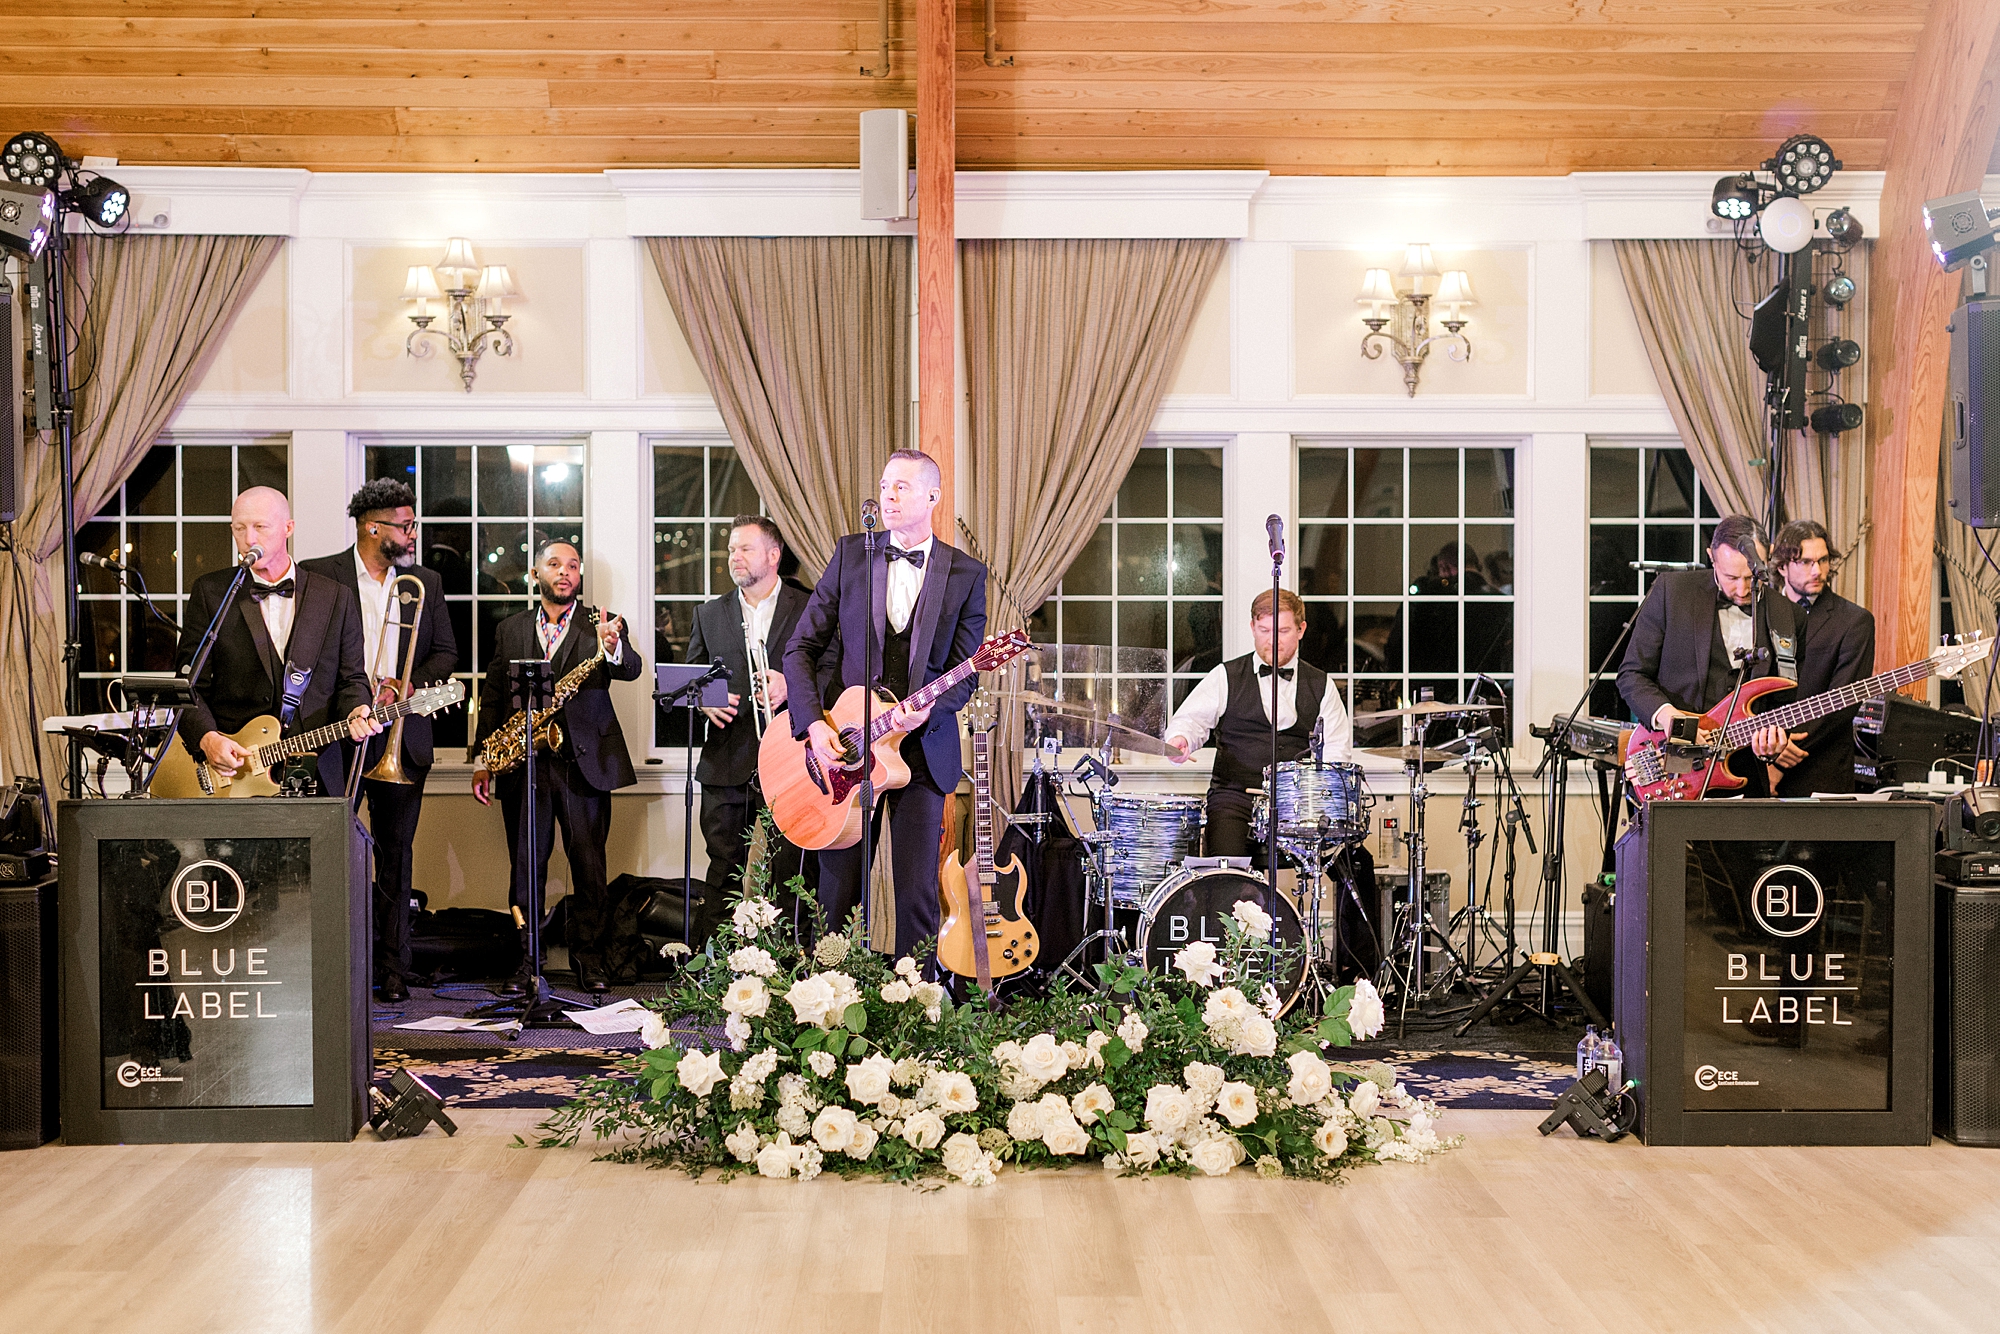 live band performs during LBI wedding reception